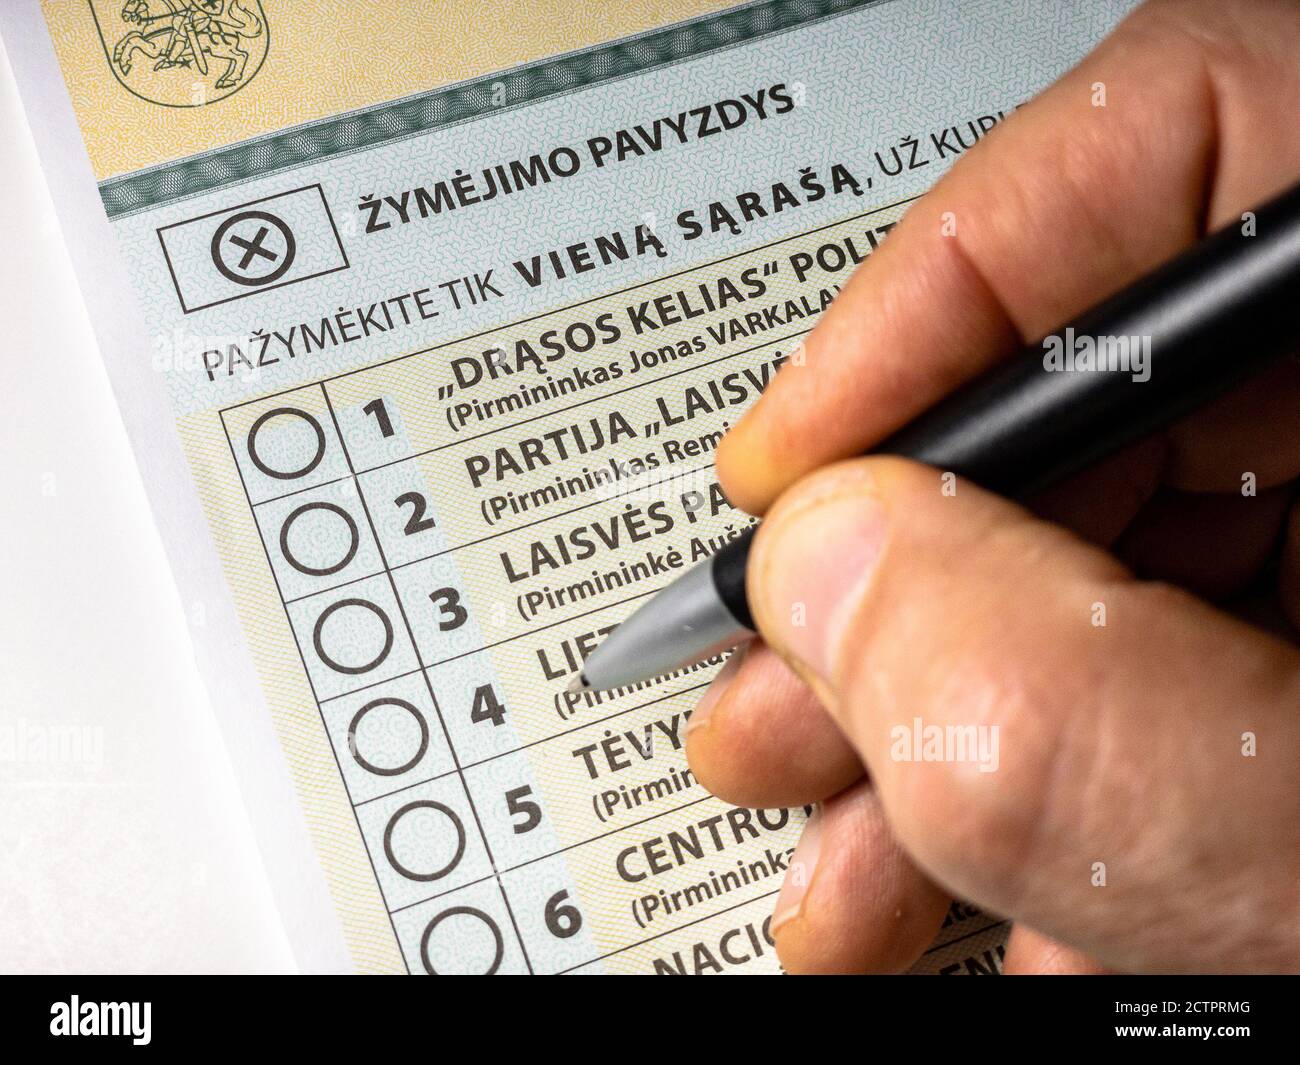 Close up multi-mandate voting ballot for for 2020 Lithuanian Seimas parliamentary elections with hand holding black pen Stock Photo